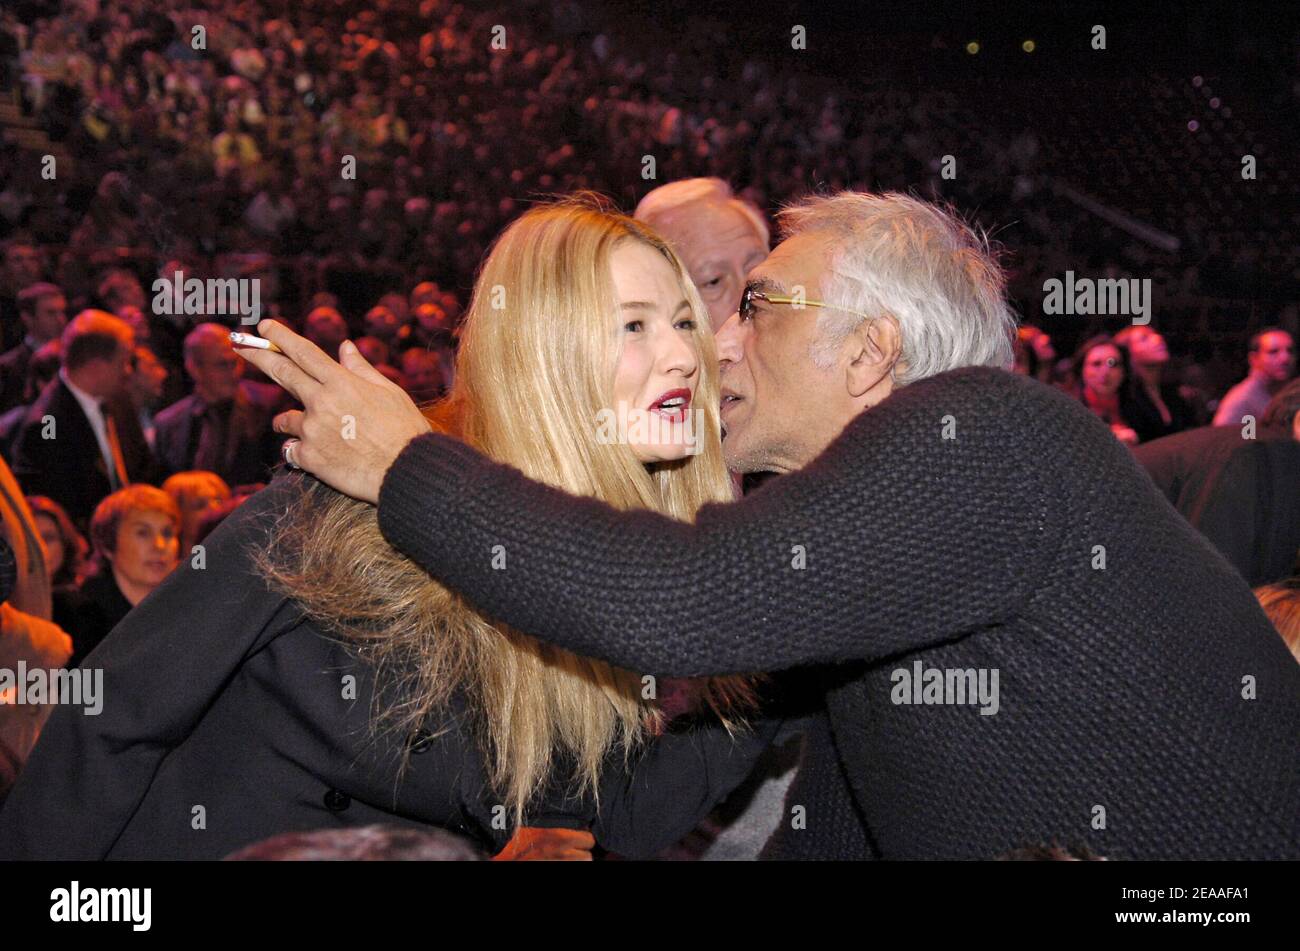 Dutch-born model Karen Mulder and French actor Gerard Darmon hug prior to the boxing fight for the WBA Flyweight title between Frenchman Brahim Asloum and Venezuelan Lorenzo Parra at the Palais Omnisports Paris-Bercy in Paris, France on December 5, 2005. Parra outpoints Asloum to retain his WBA title. Photo by Nicolas Gouhier/CAMELEON/ABACAPRESS.COM Stock Photo